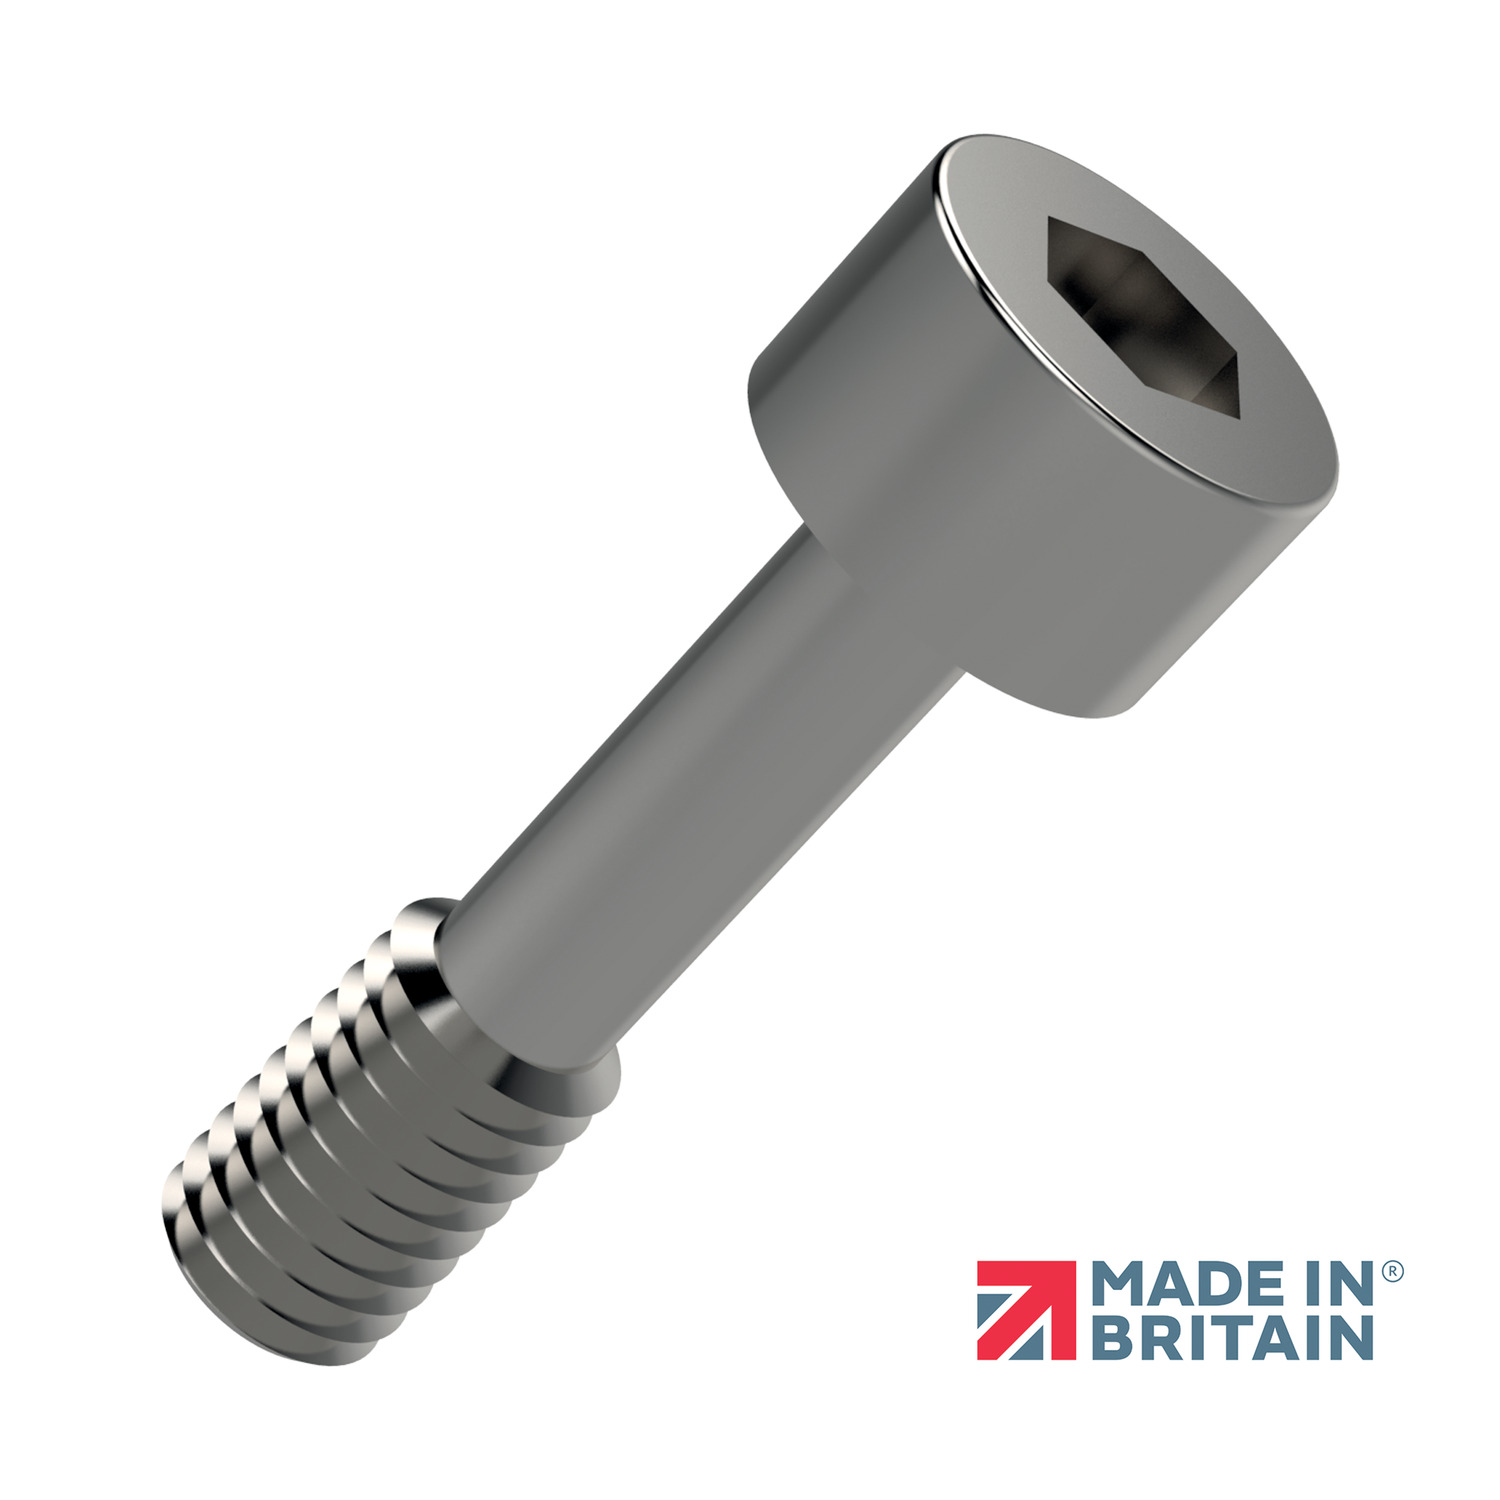 Product P0154.A2, Captive Screws - Cap Head hex drive - 303 stainless / 